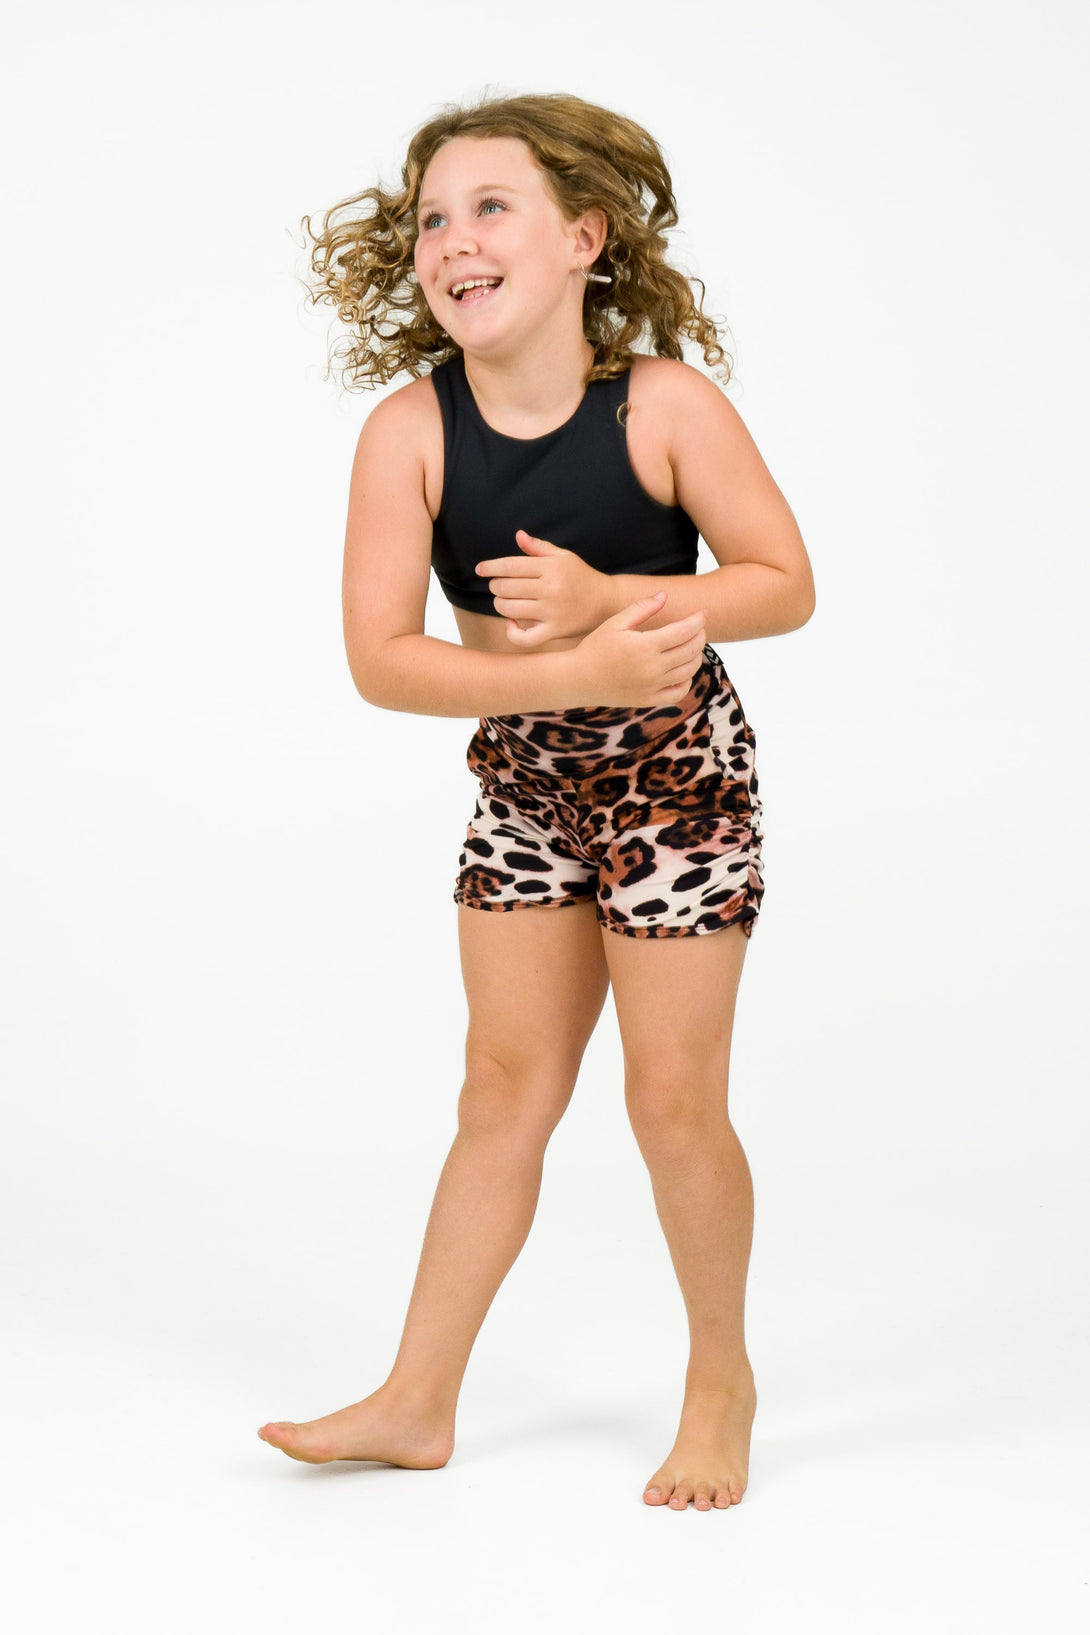 Young girl wearing activewear shorts in a leopard primal print for sports and gymnastics from exotica athletica